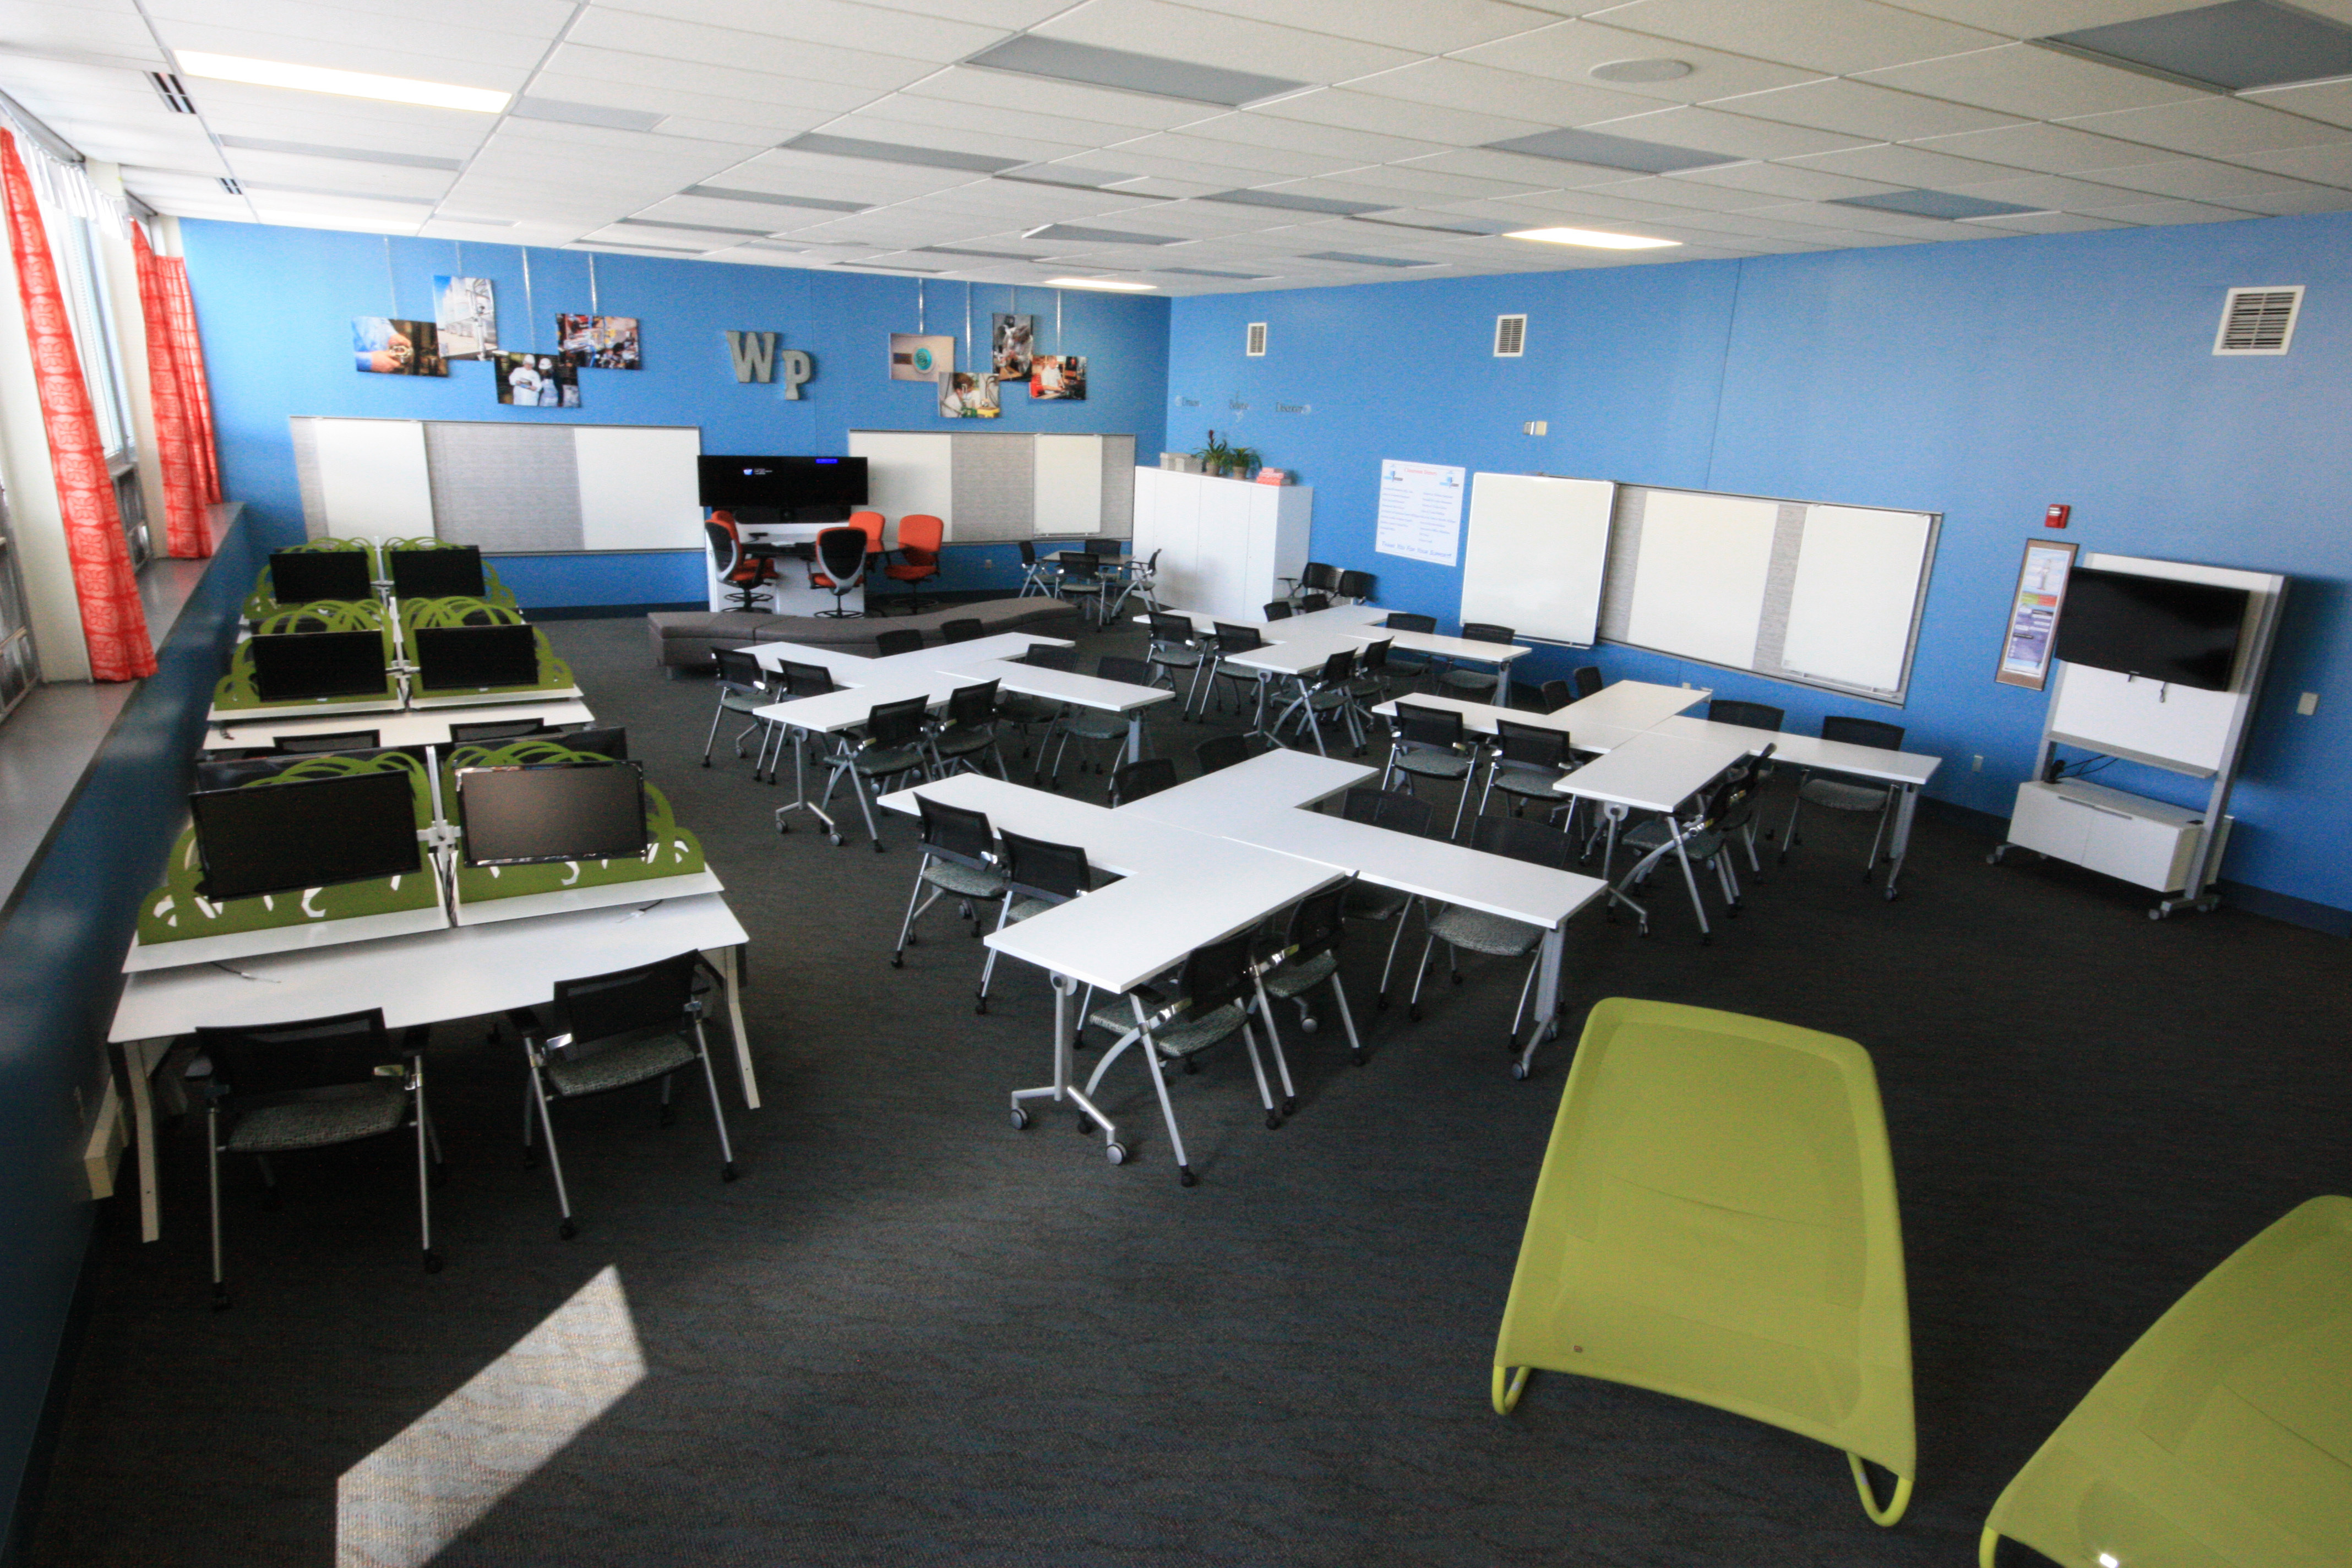 Innovative Office Solutions, Kimball Office Partner to Design “Classroom of  the Future” | Business Wire